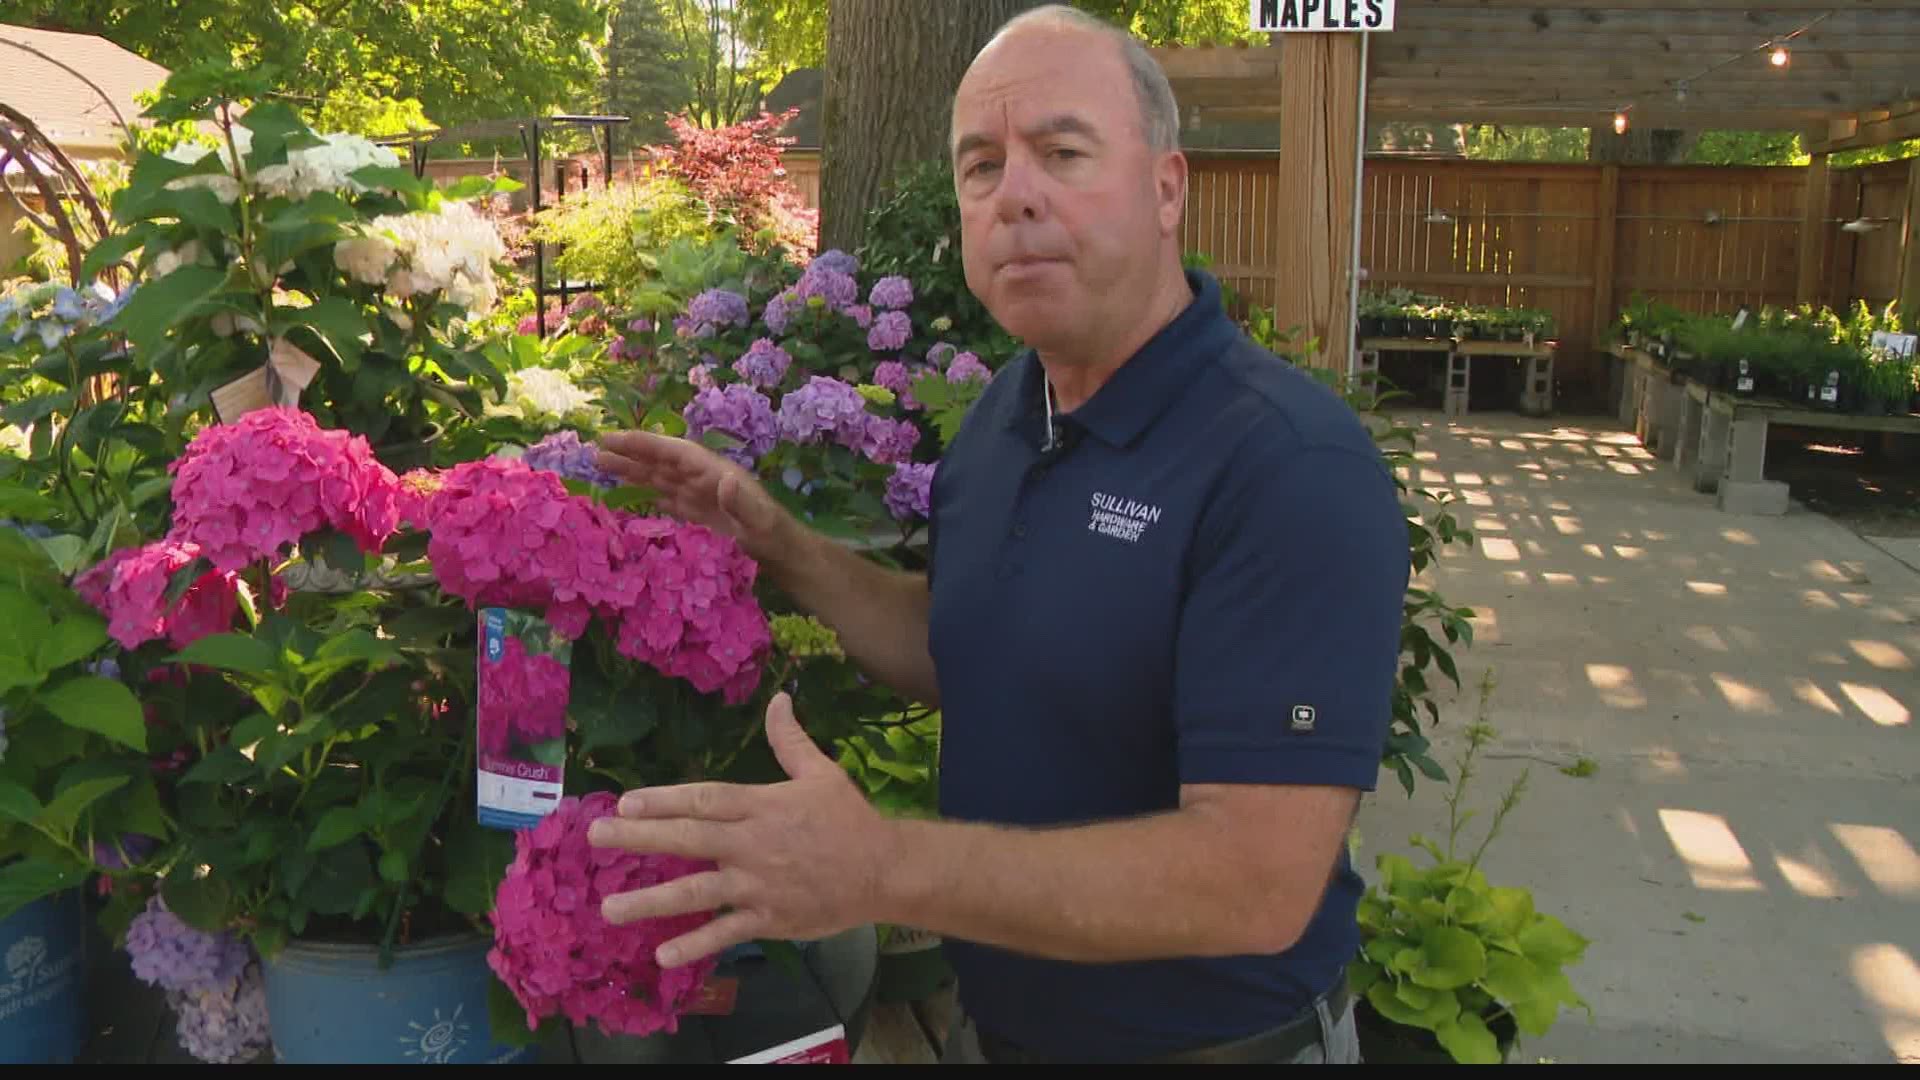 Hydrangeas come in different varieties that require different care. Pat explains the differences.